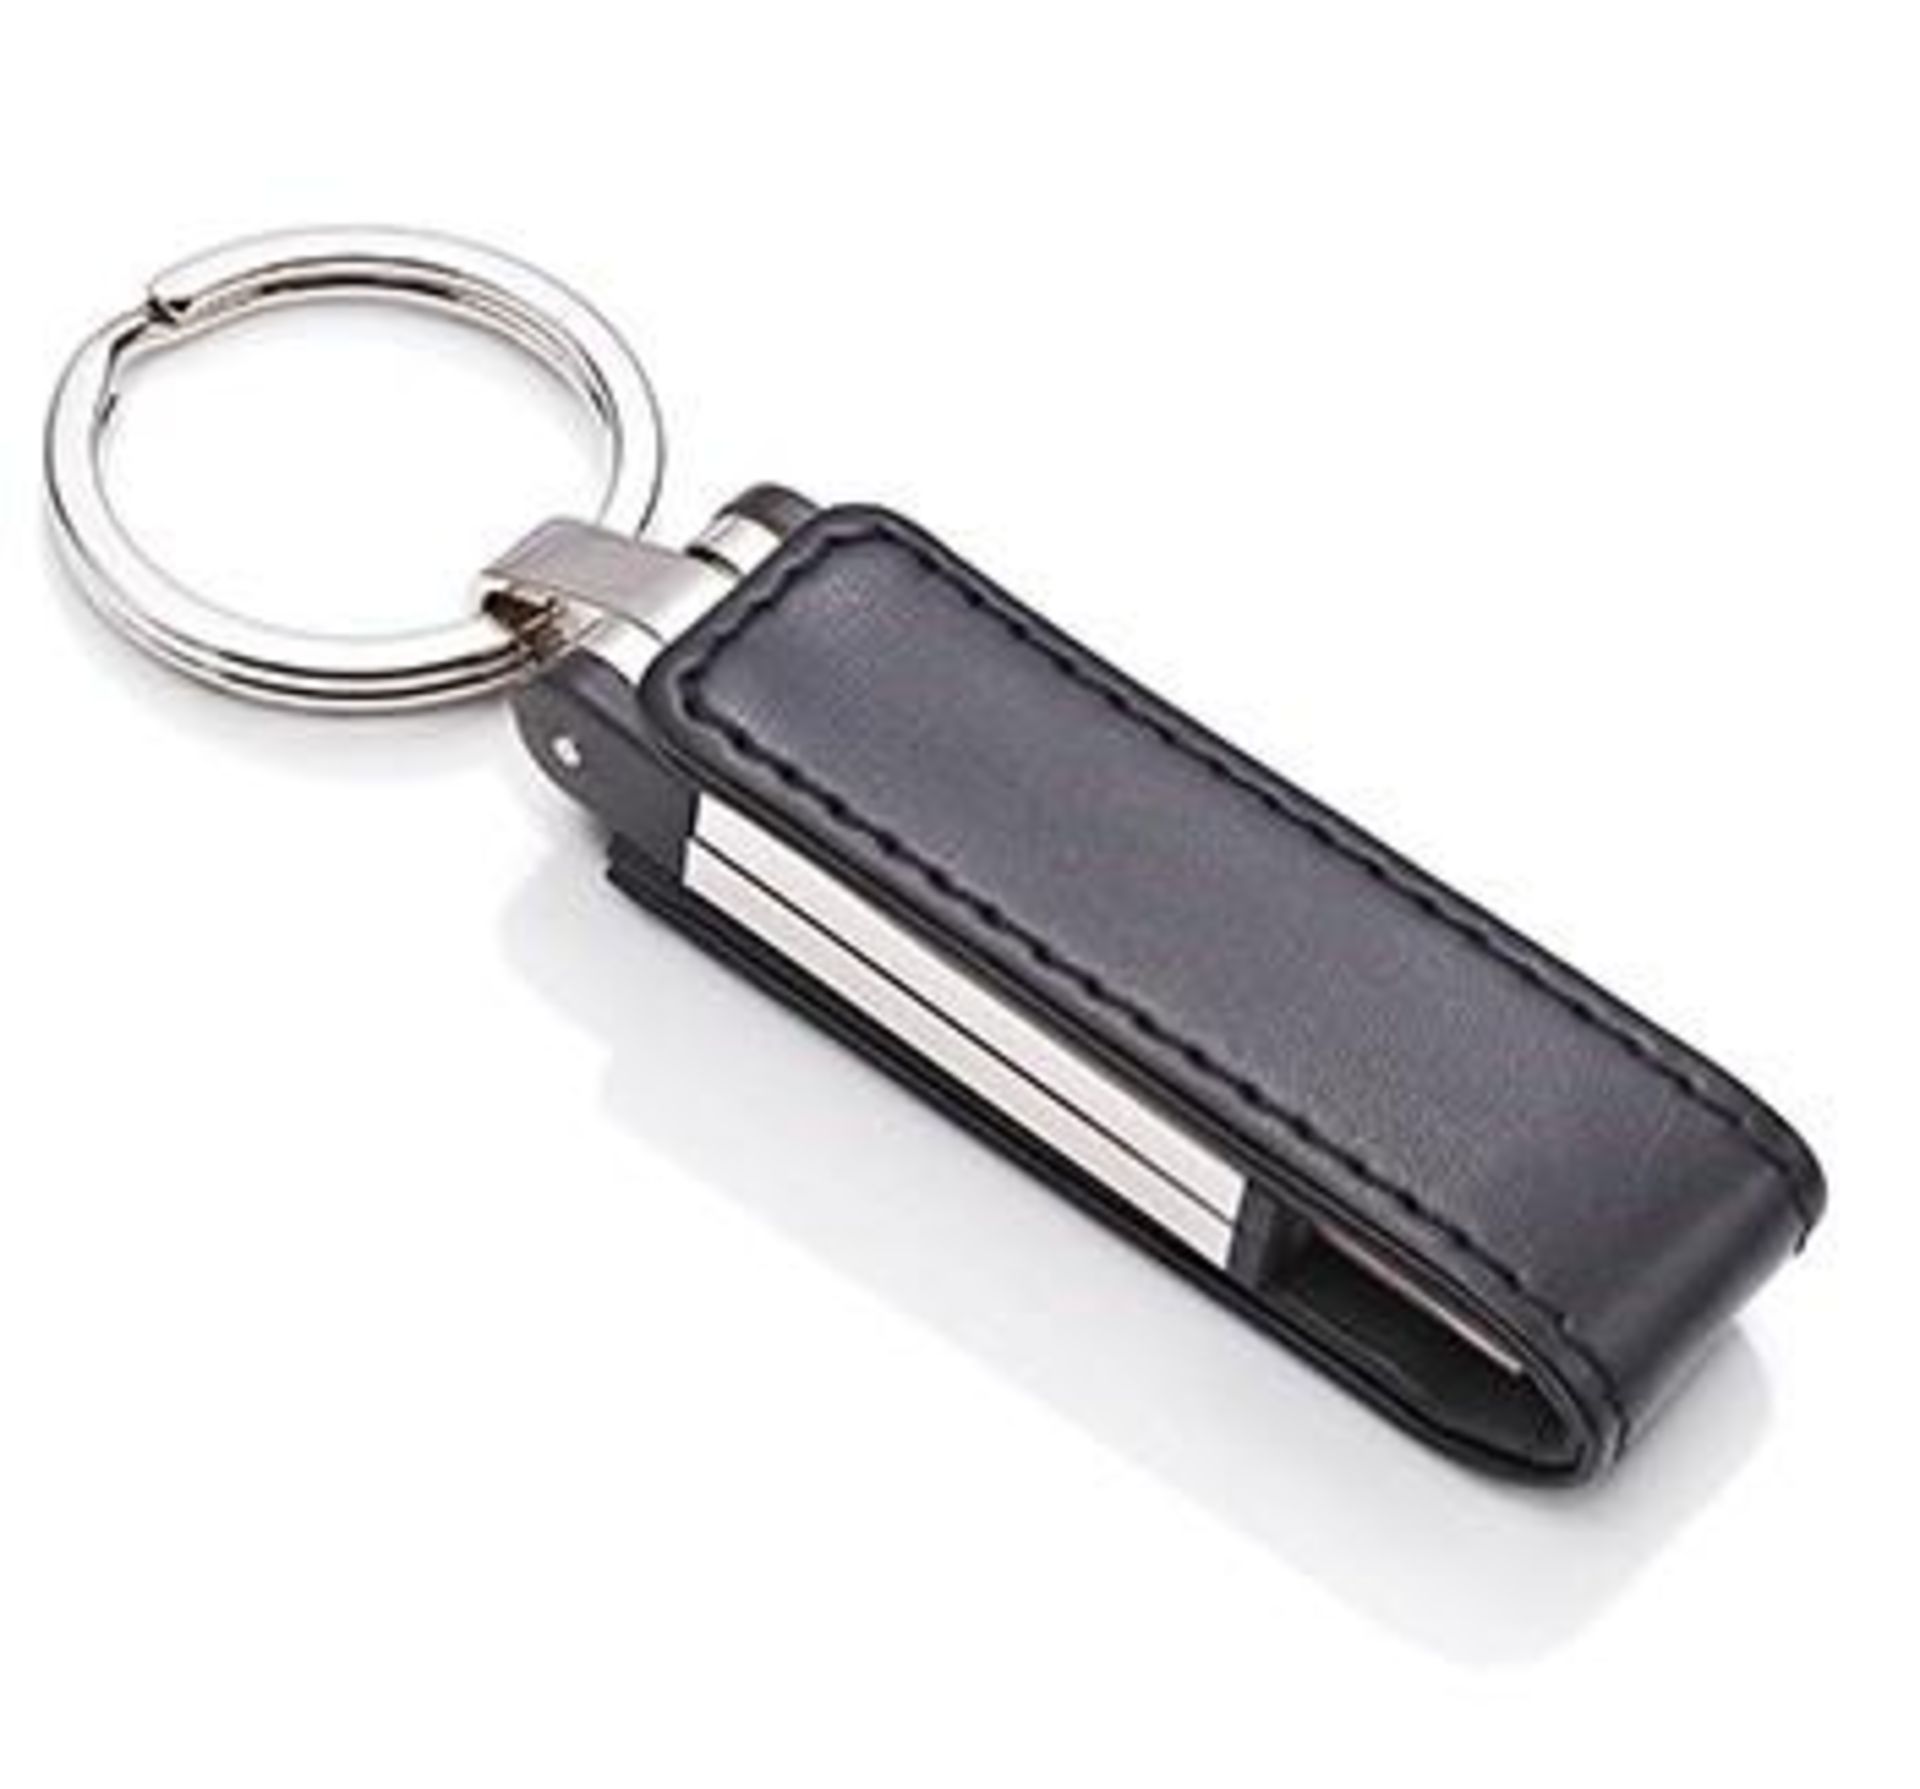 10 x ICE London Silver Plated 2GB USB Flashdrive Keyring - Features A Genuine Leather Wrap With